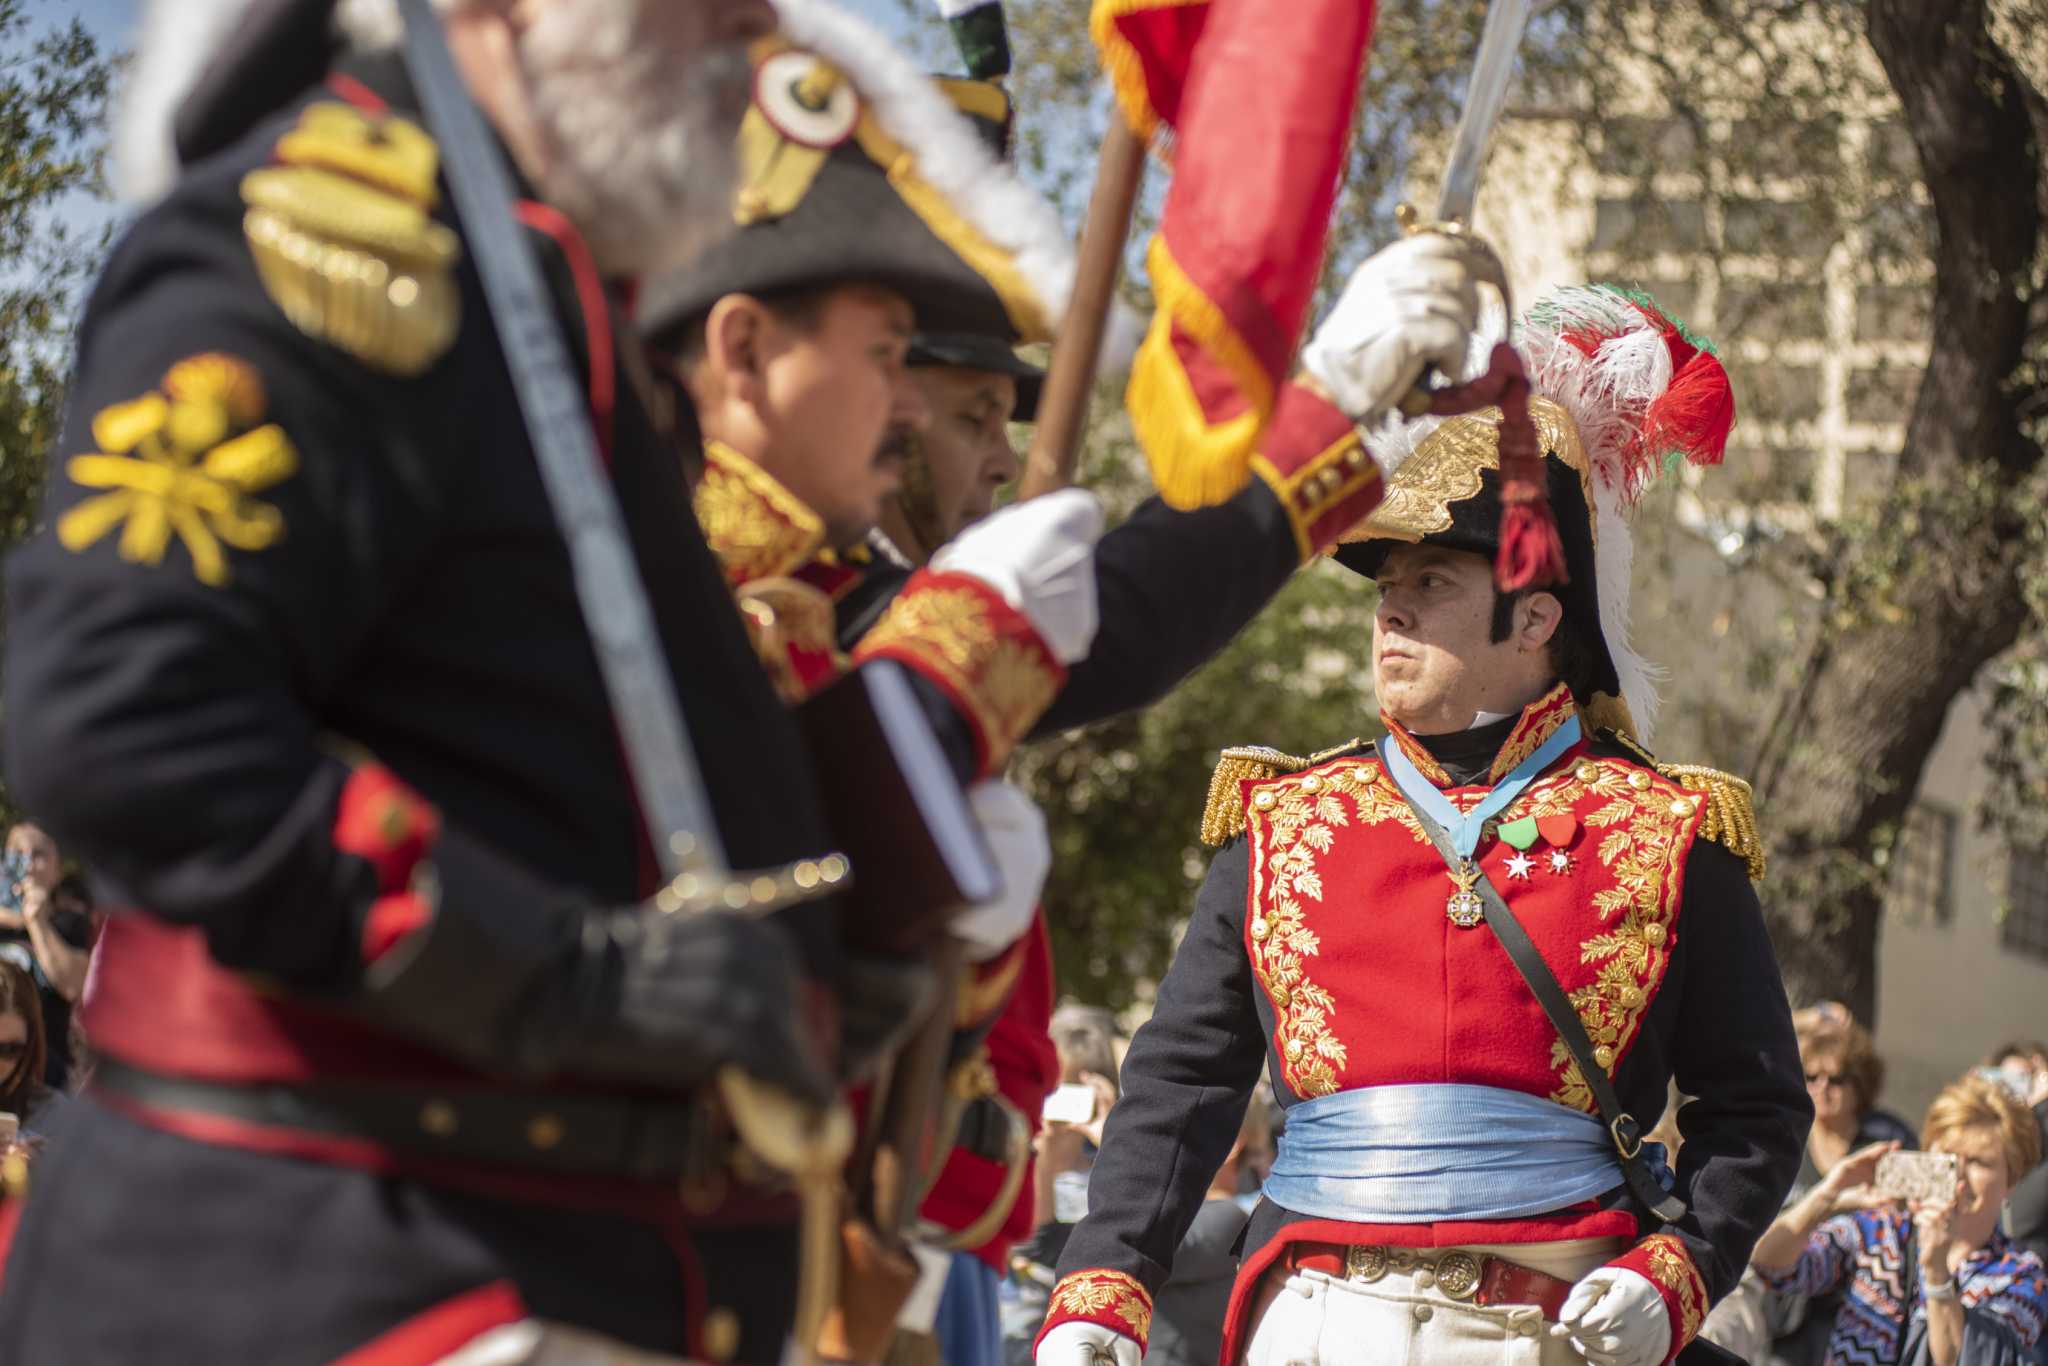 With plenty of fanfare and pomp, Gen. Santa Anna marches into San